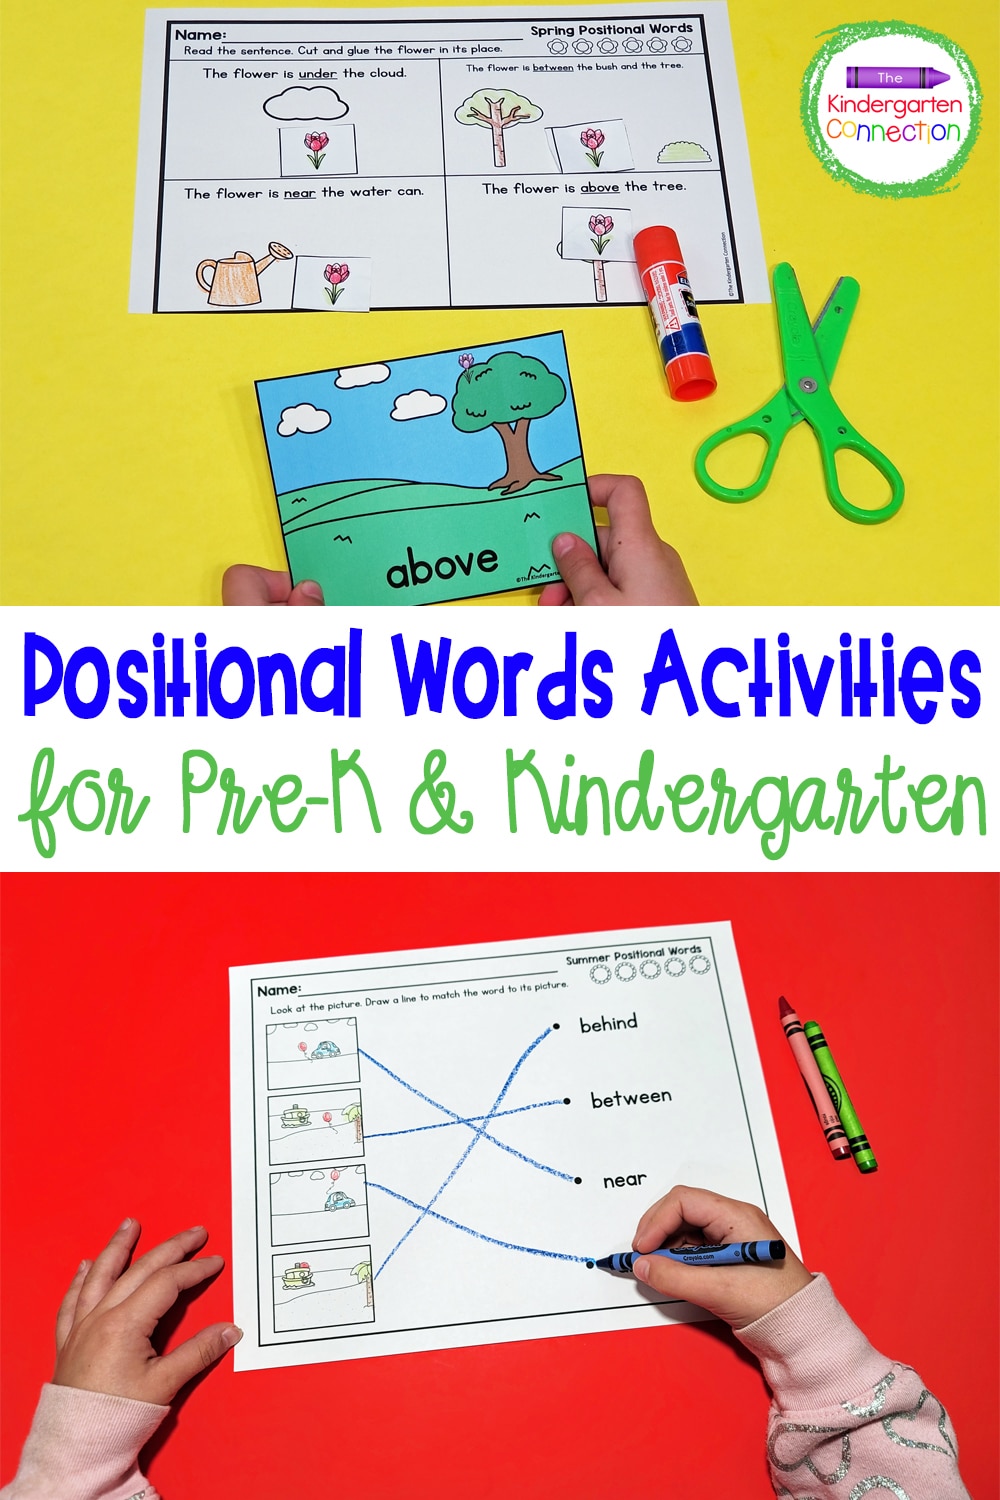 This pack of Positional Words Activities for Pre-K & Kindergarten provides visuals and easy-prep activities that you and your kids will love!